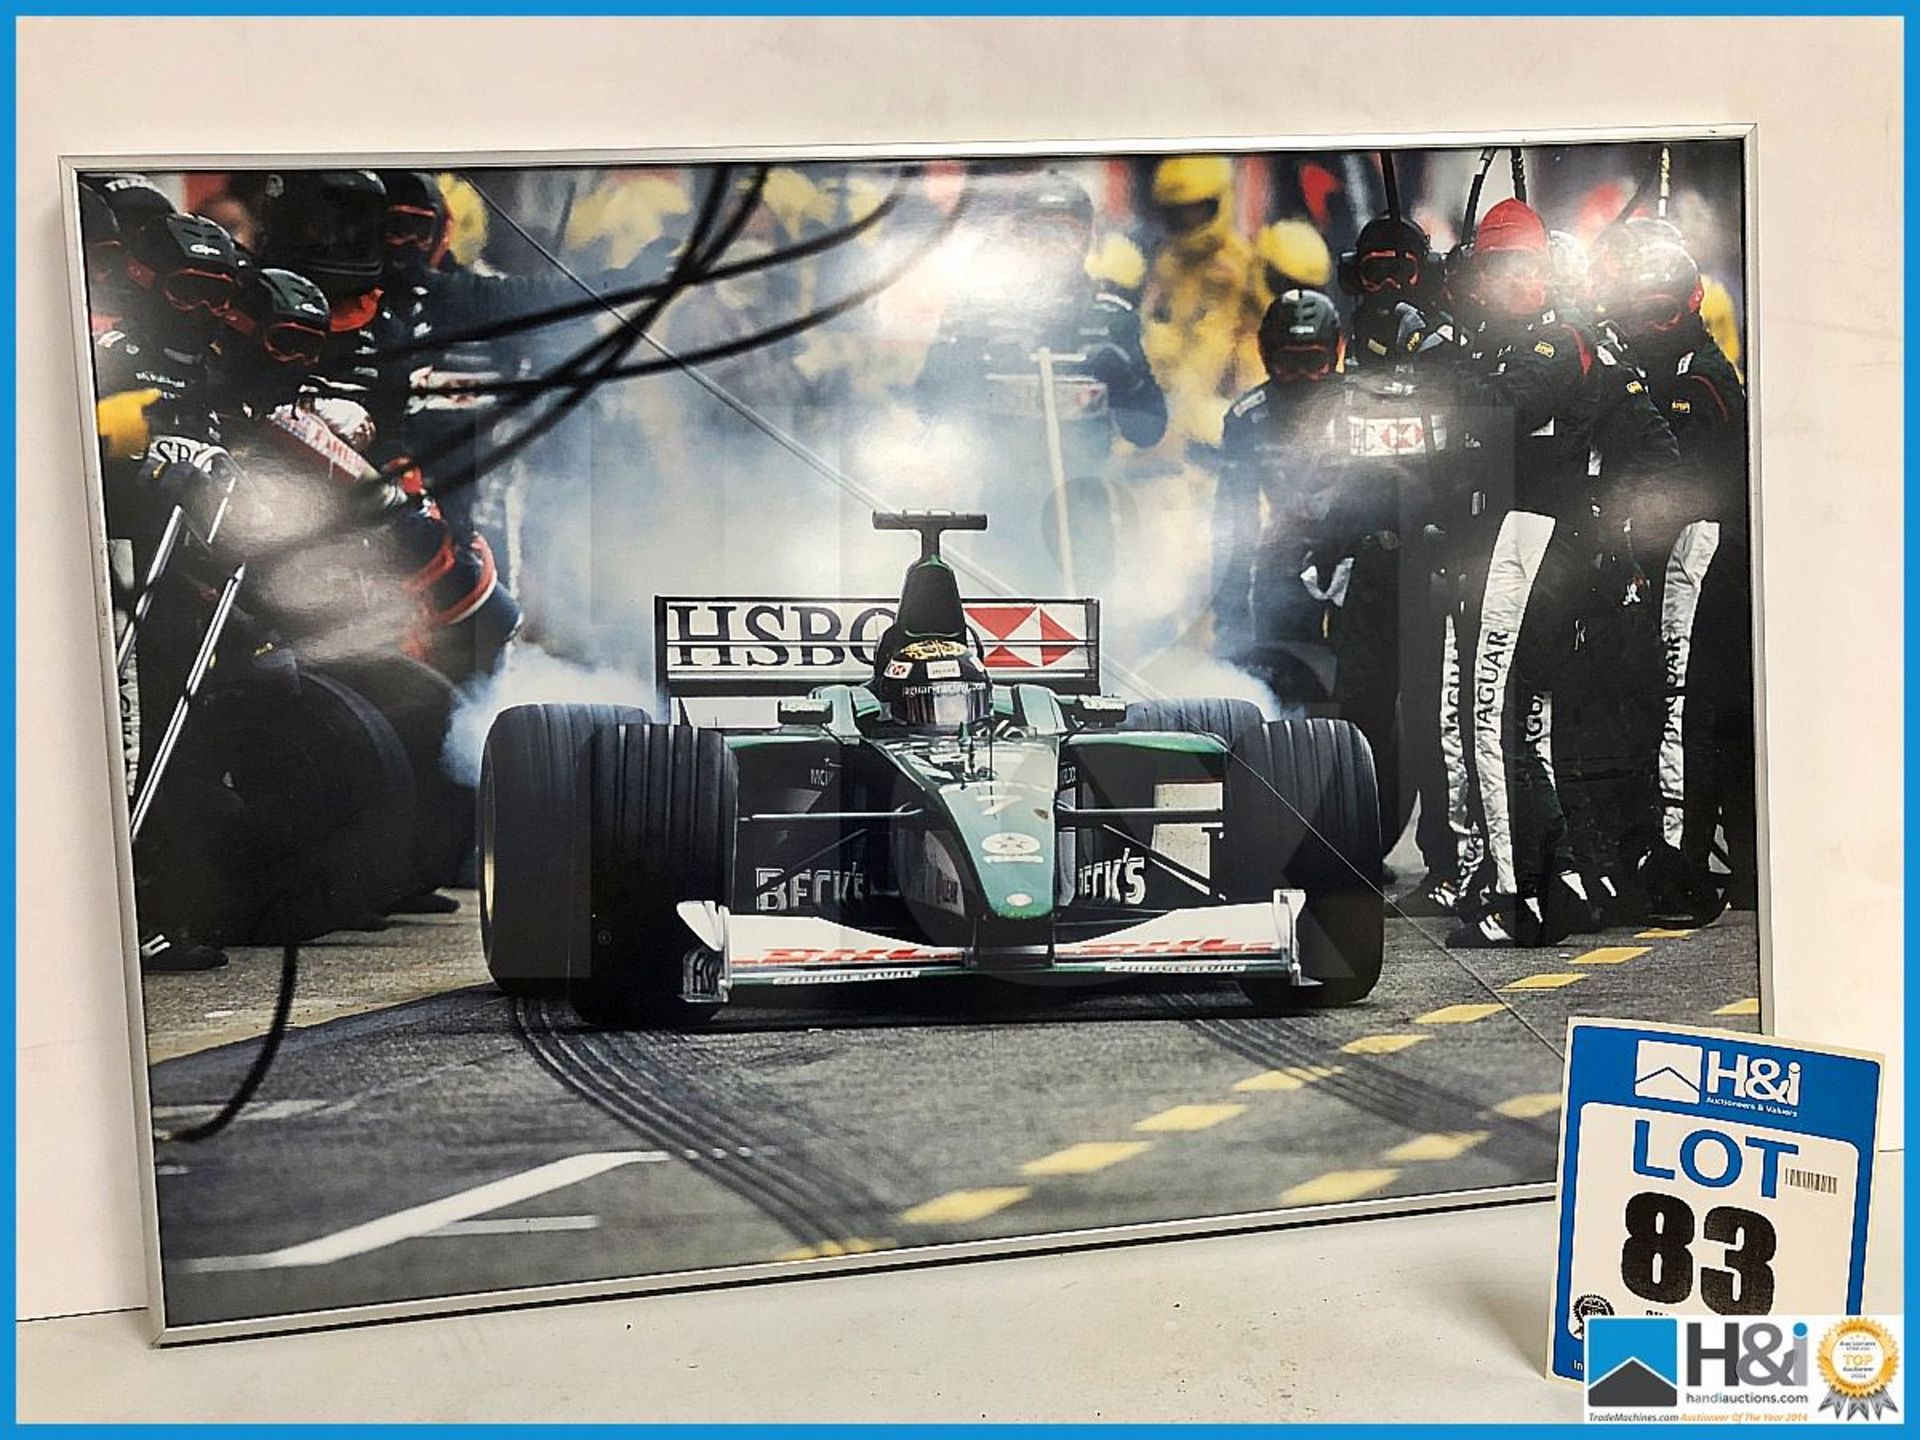 Ex Cosworth works framed print of F1 car leaving pits. Approx 30in x 20in. Crack in glass. Aluminium